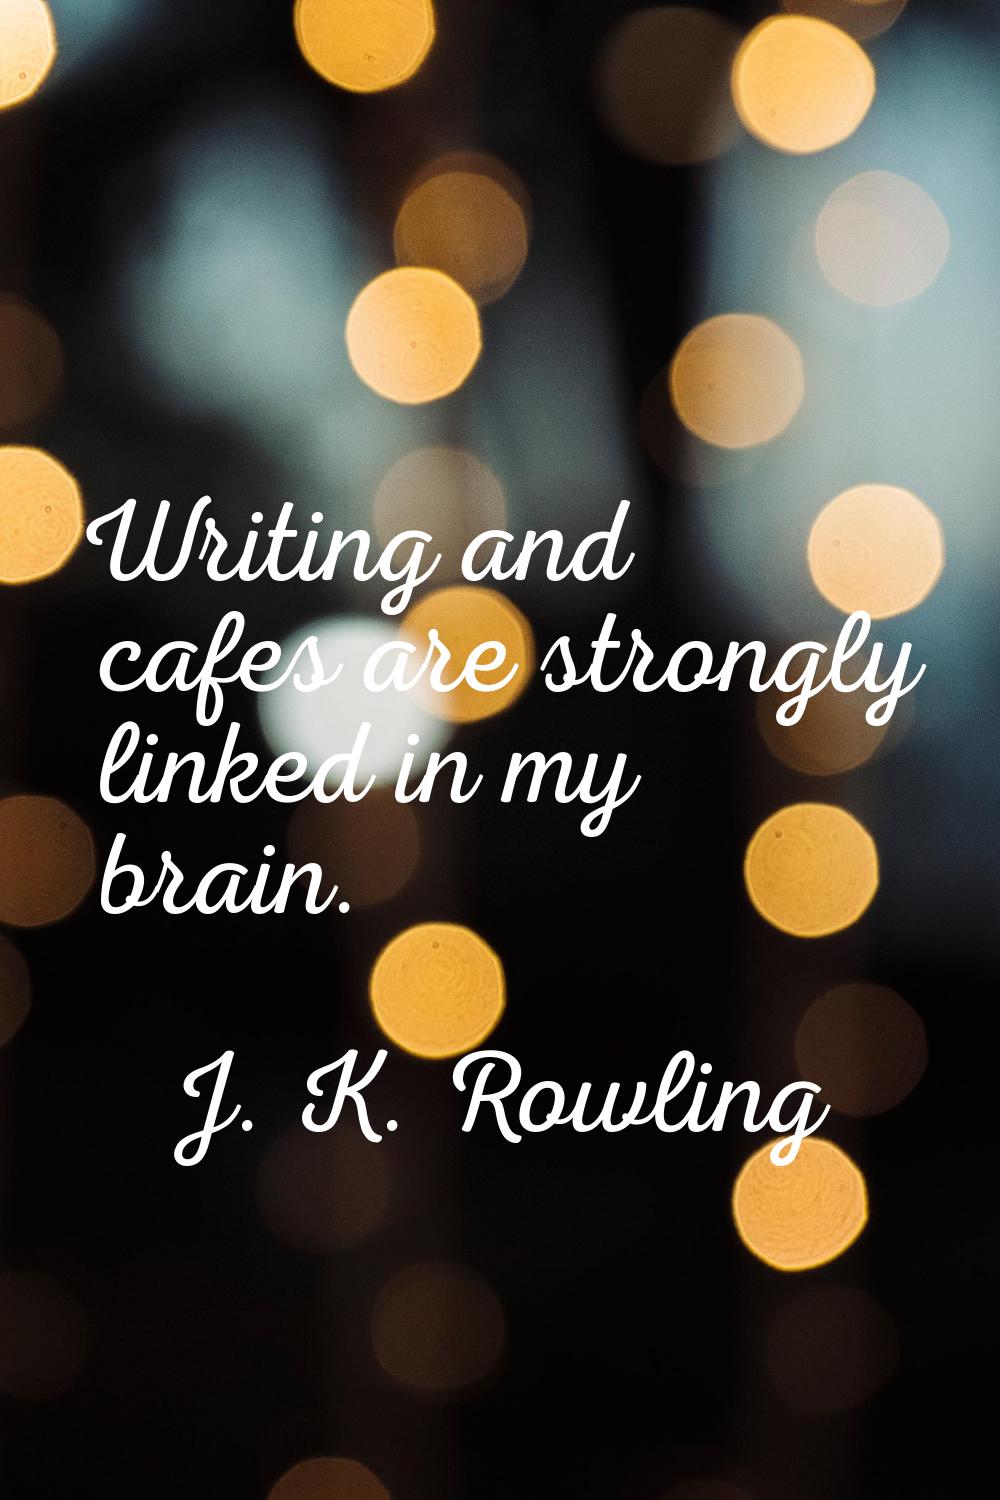 Writing and cafes are strongly linked in my brain.